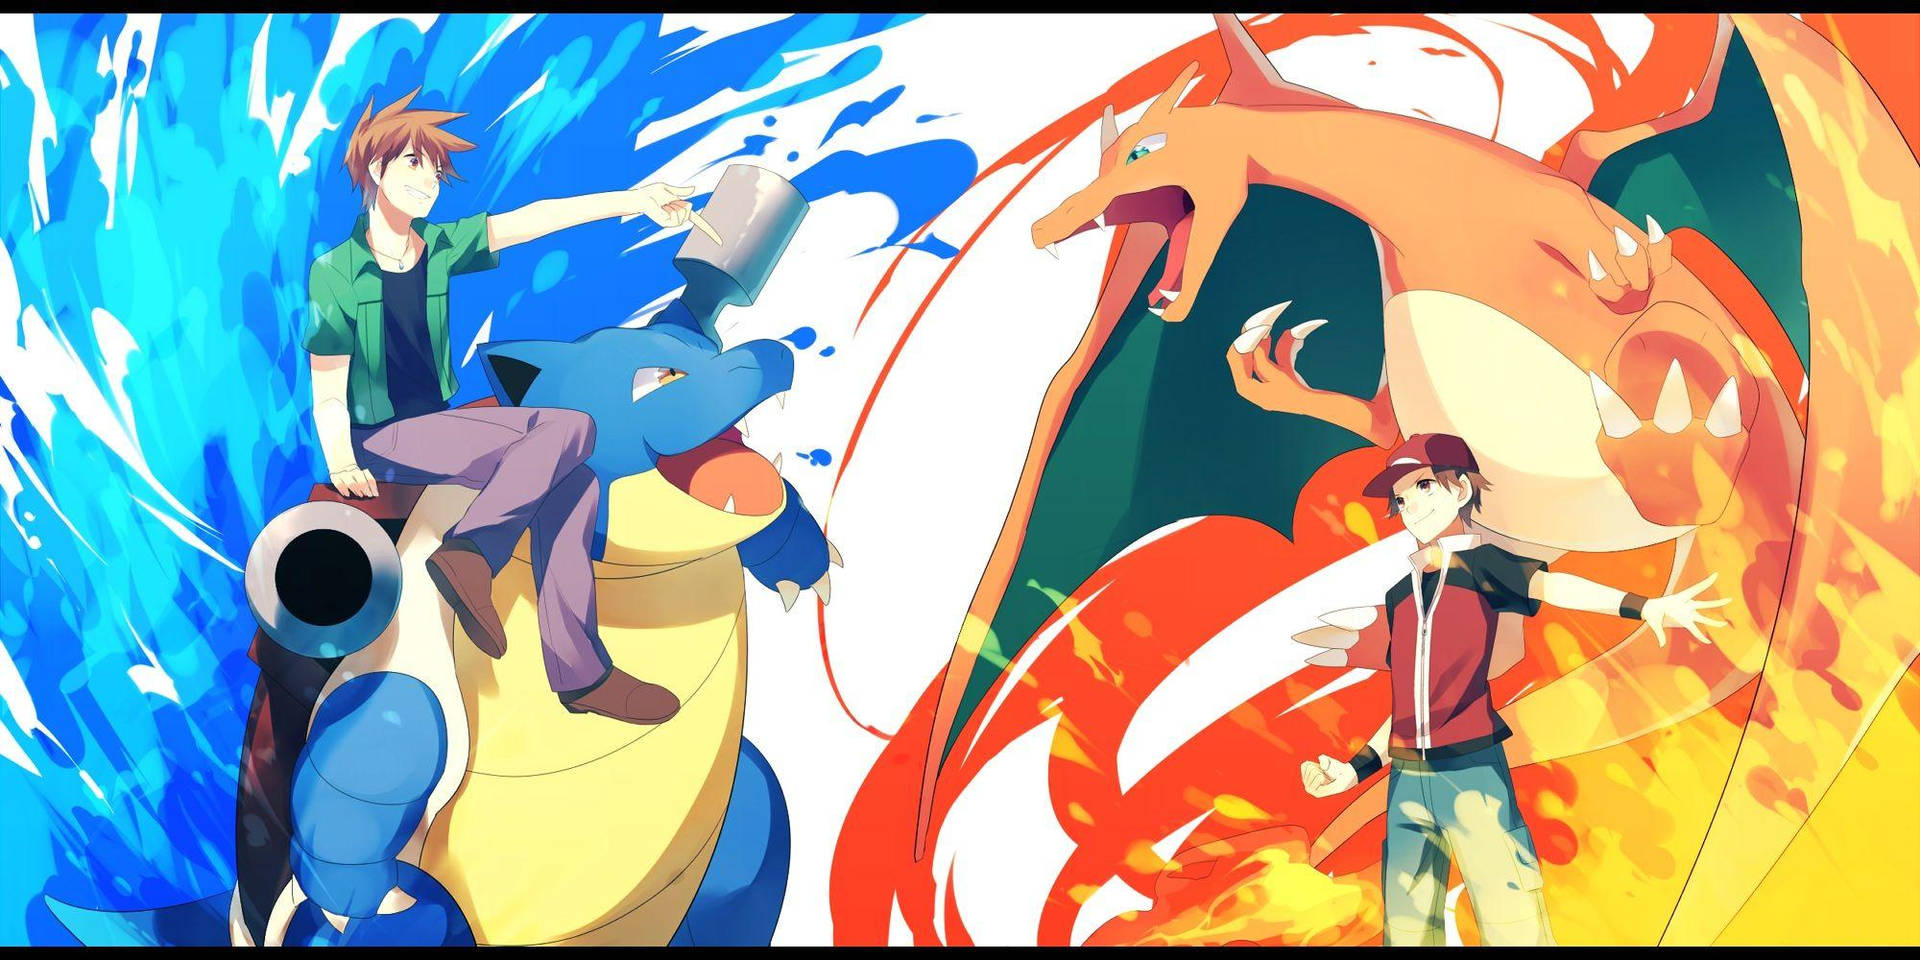 The Ultimate Duel - Blastoise and Charizard's Epic Match! Wallpaper